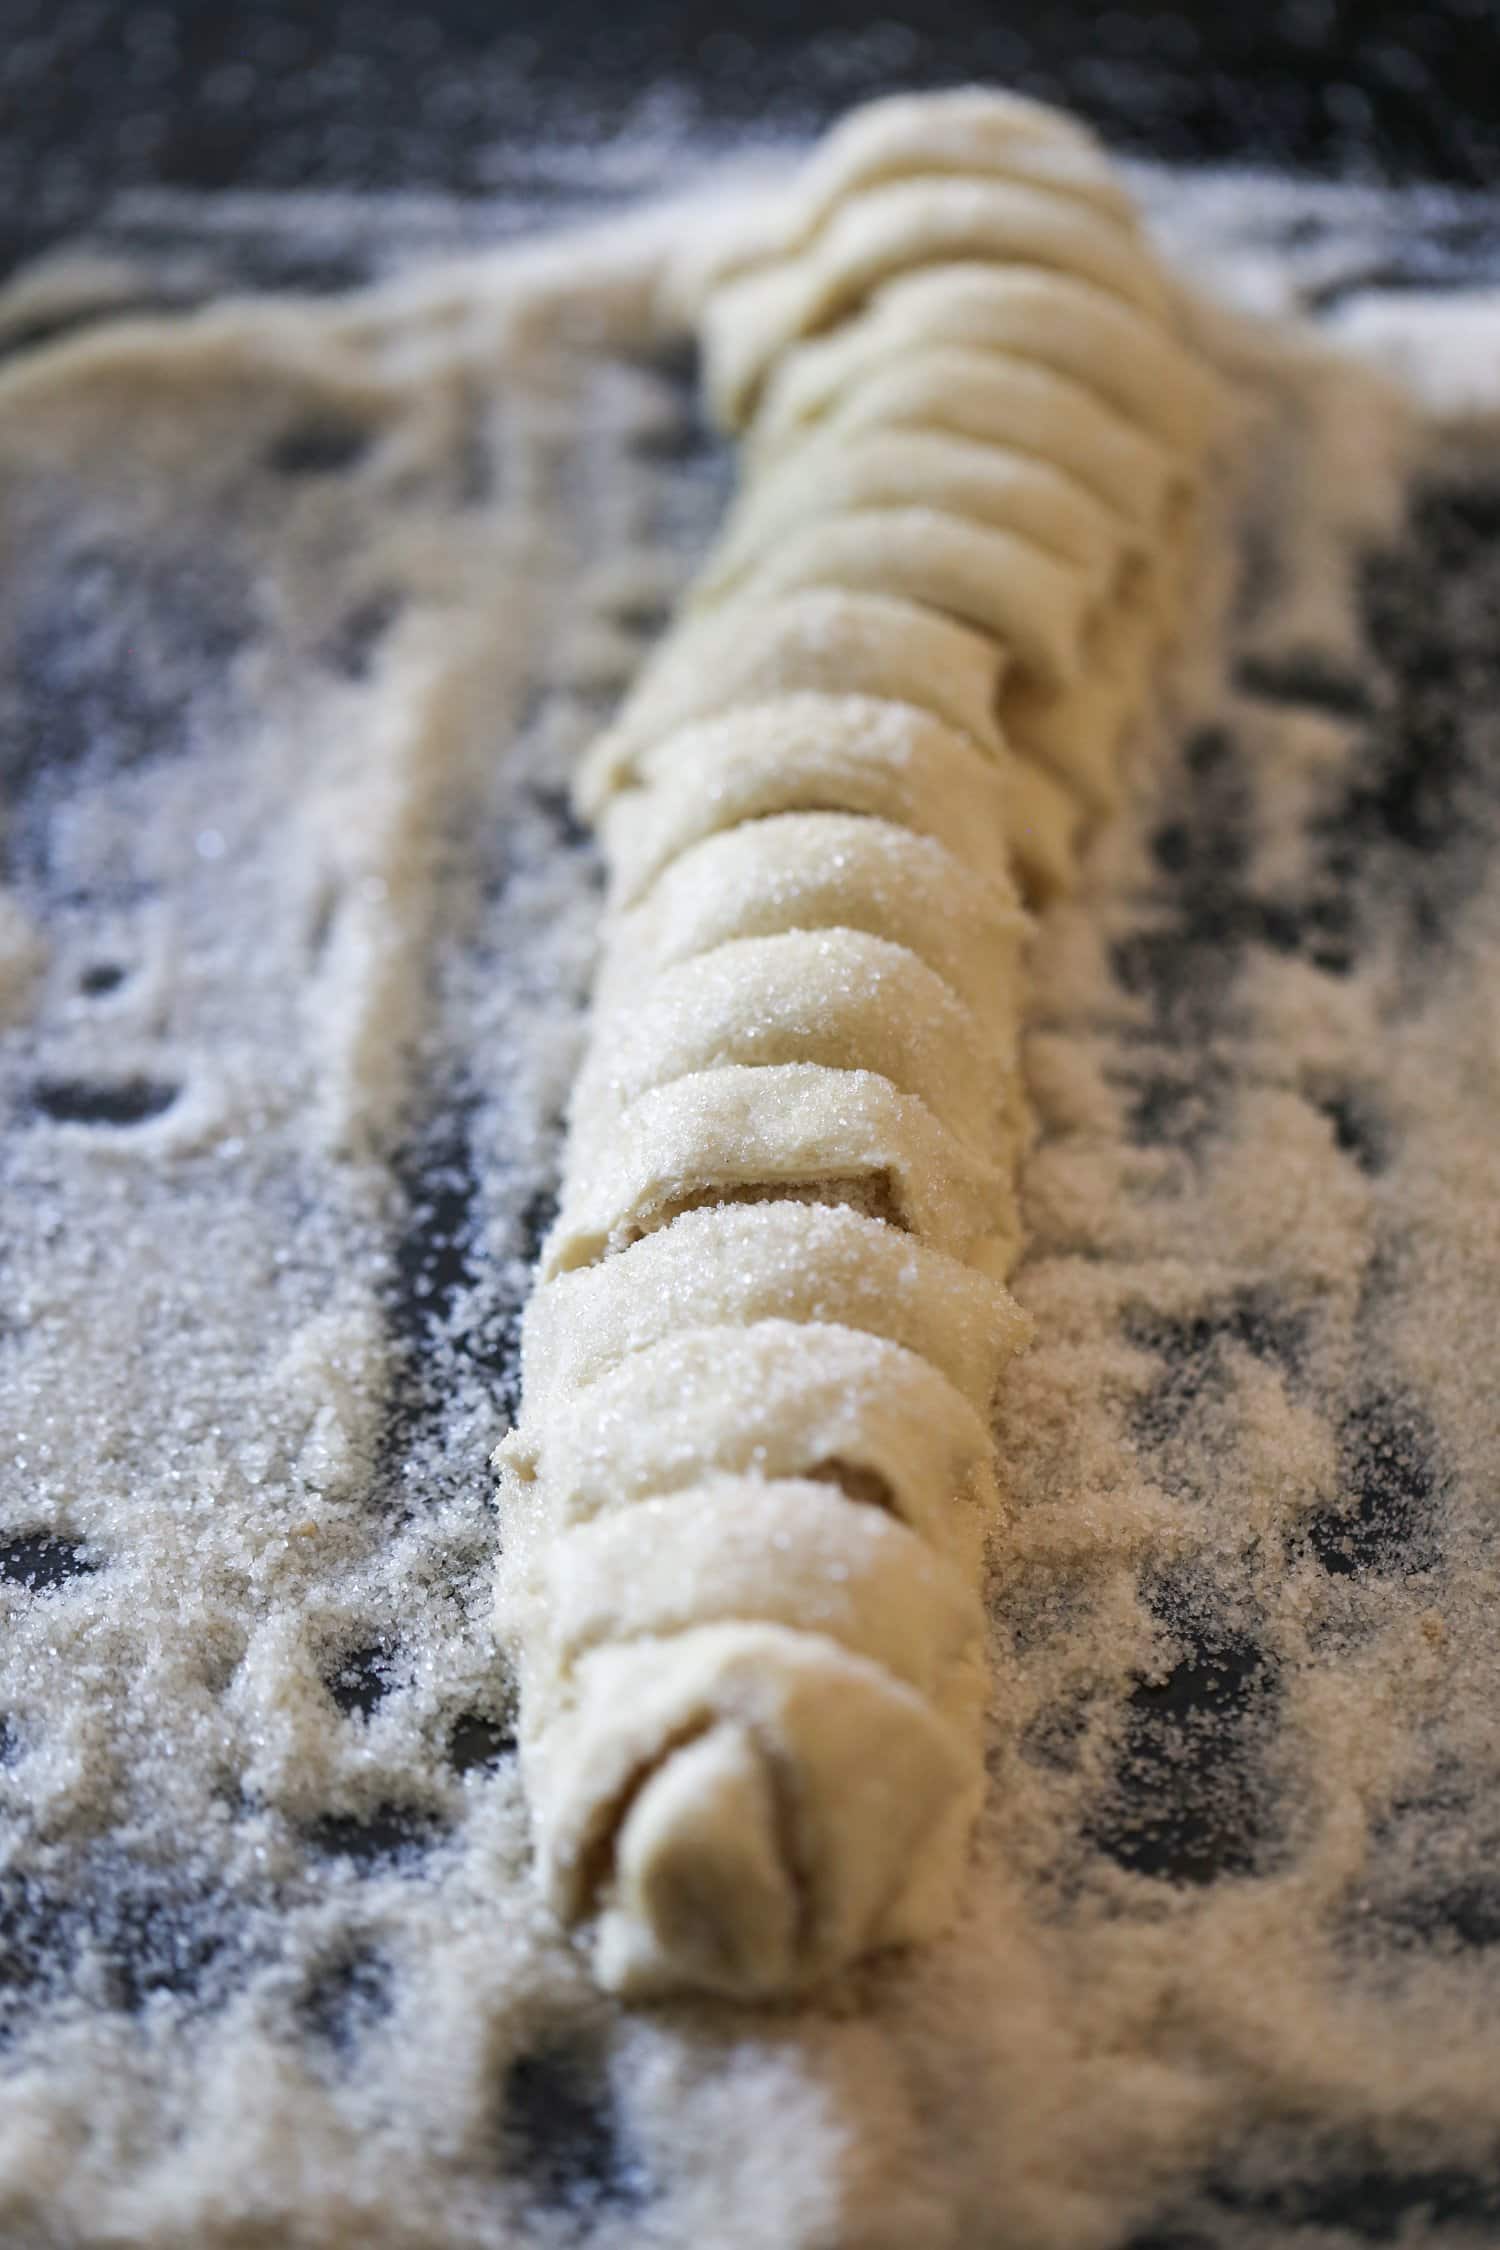 Folded and chilled palmier pastry dough is cut into half inch slices.